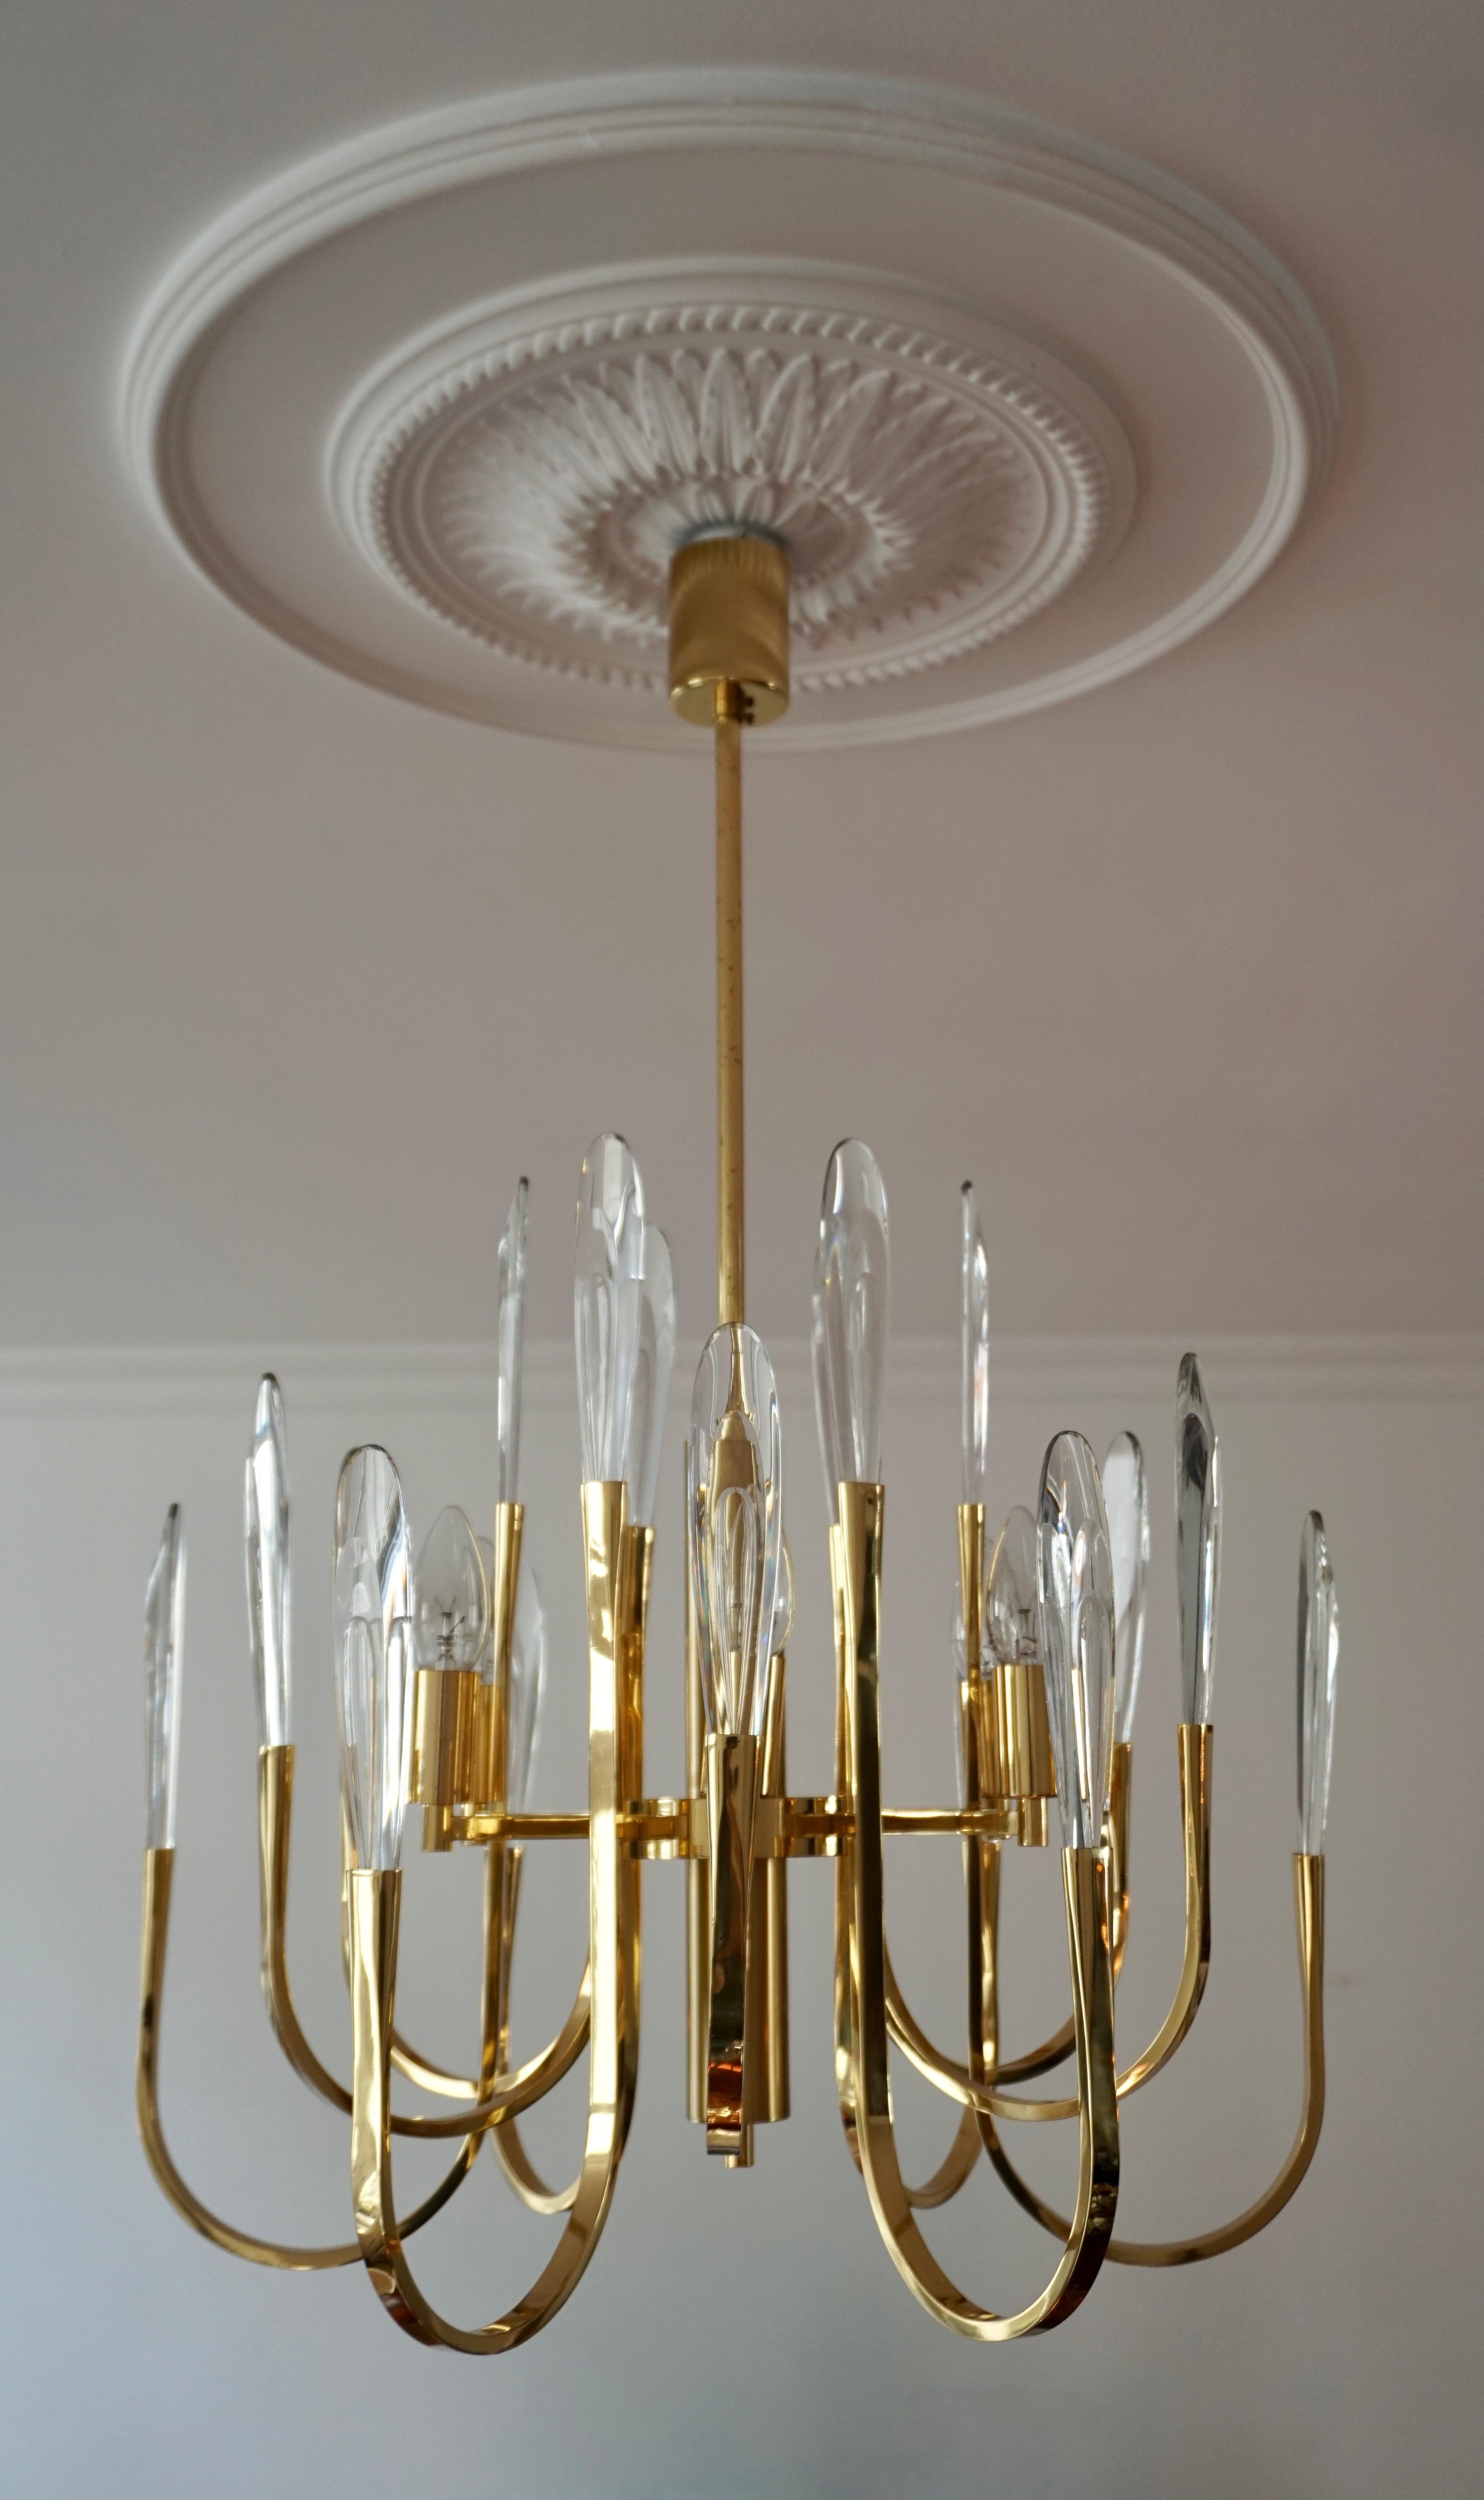 This modern elegant Italian vintage Gaetano Sciolari six-light chandelier has 24 beveled crystal prism glass pendants that attach to each arm. They do detach for shipping. It is from the 1970s. This is a beautiful chandelier from the 1970s but